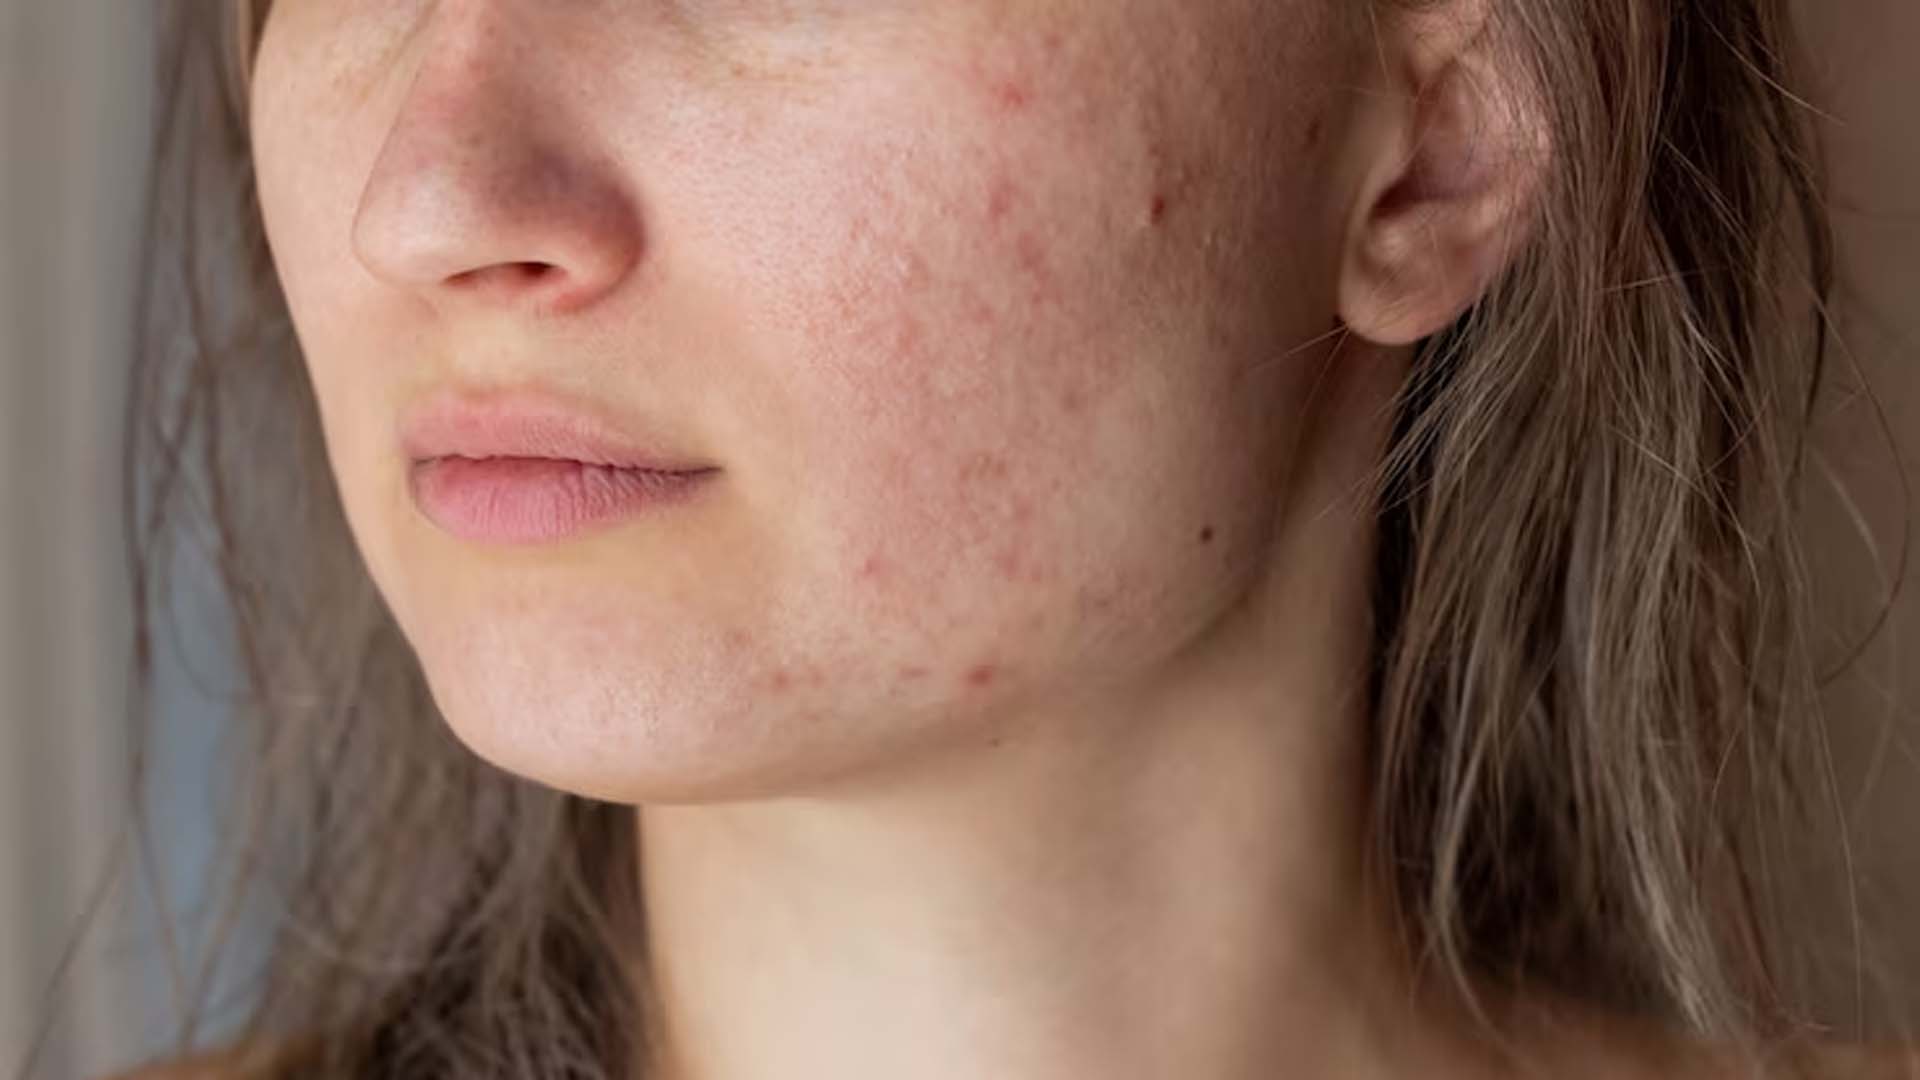 Women with Acne